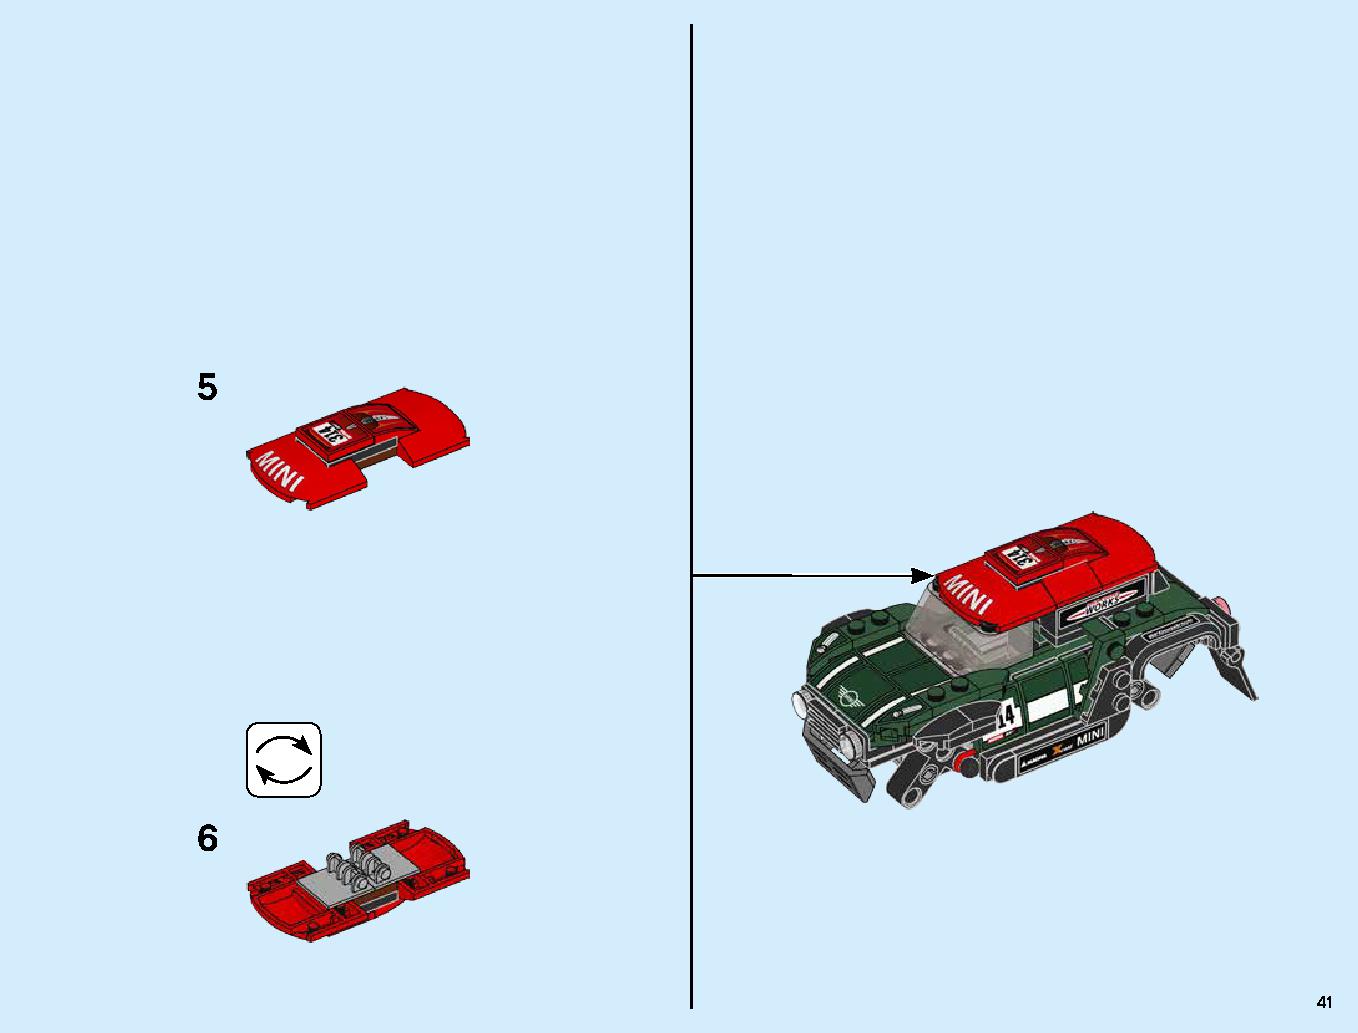 1967 Mini Cooper S Rally and 2018 MINI John Cooper Works Buggy 75894 LEGO information LEGO instructions 41 page